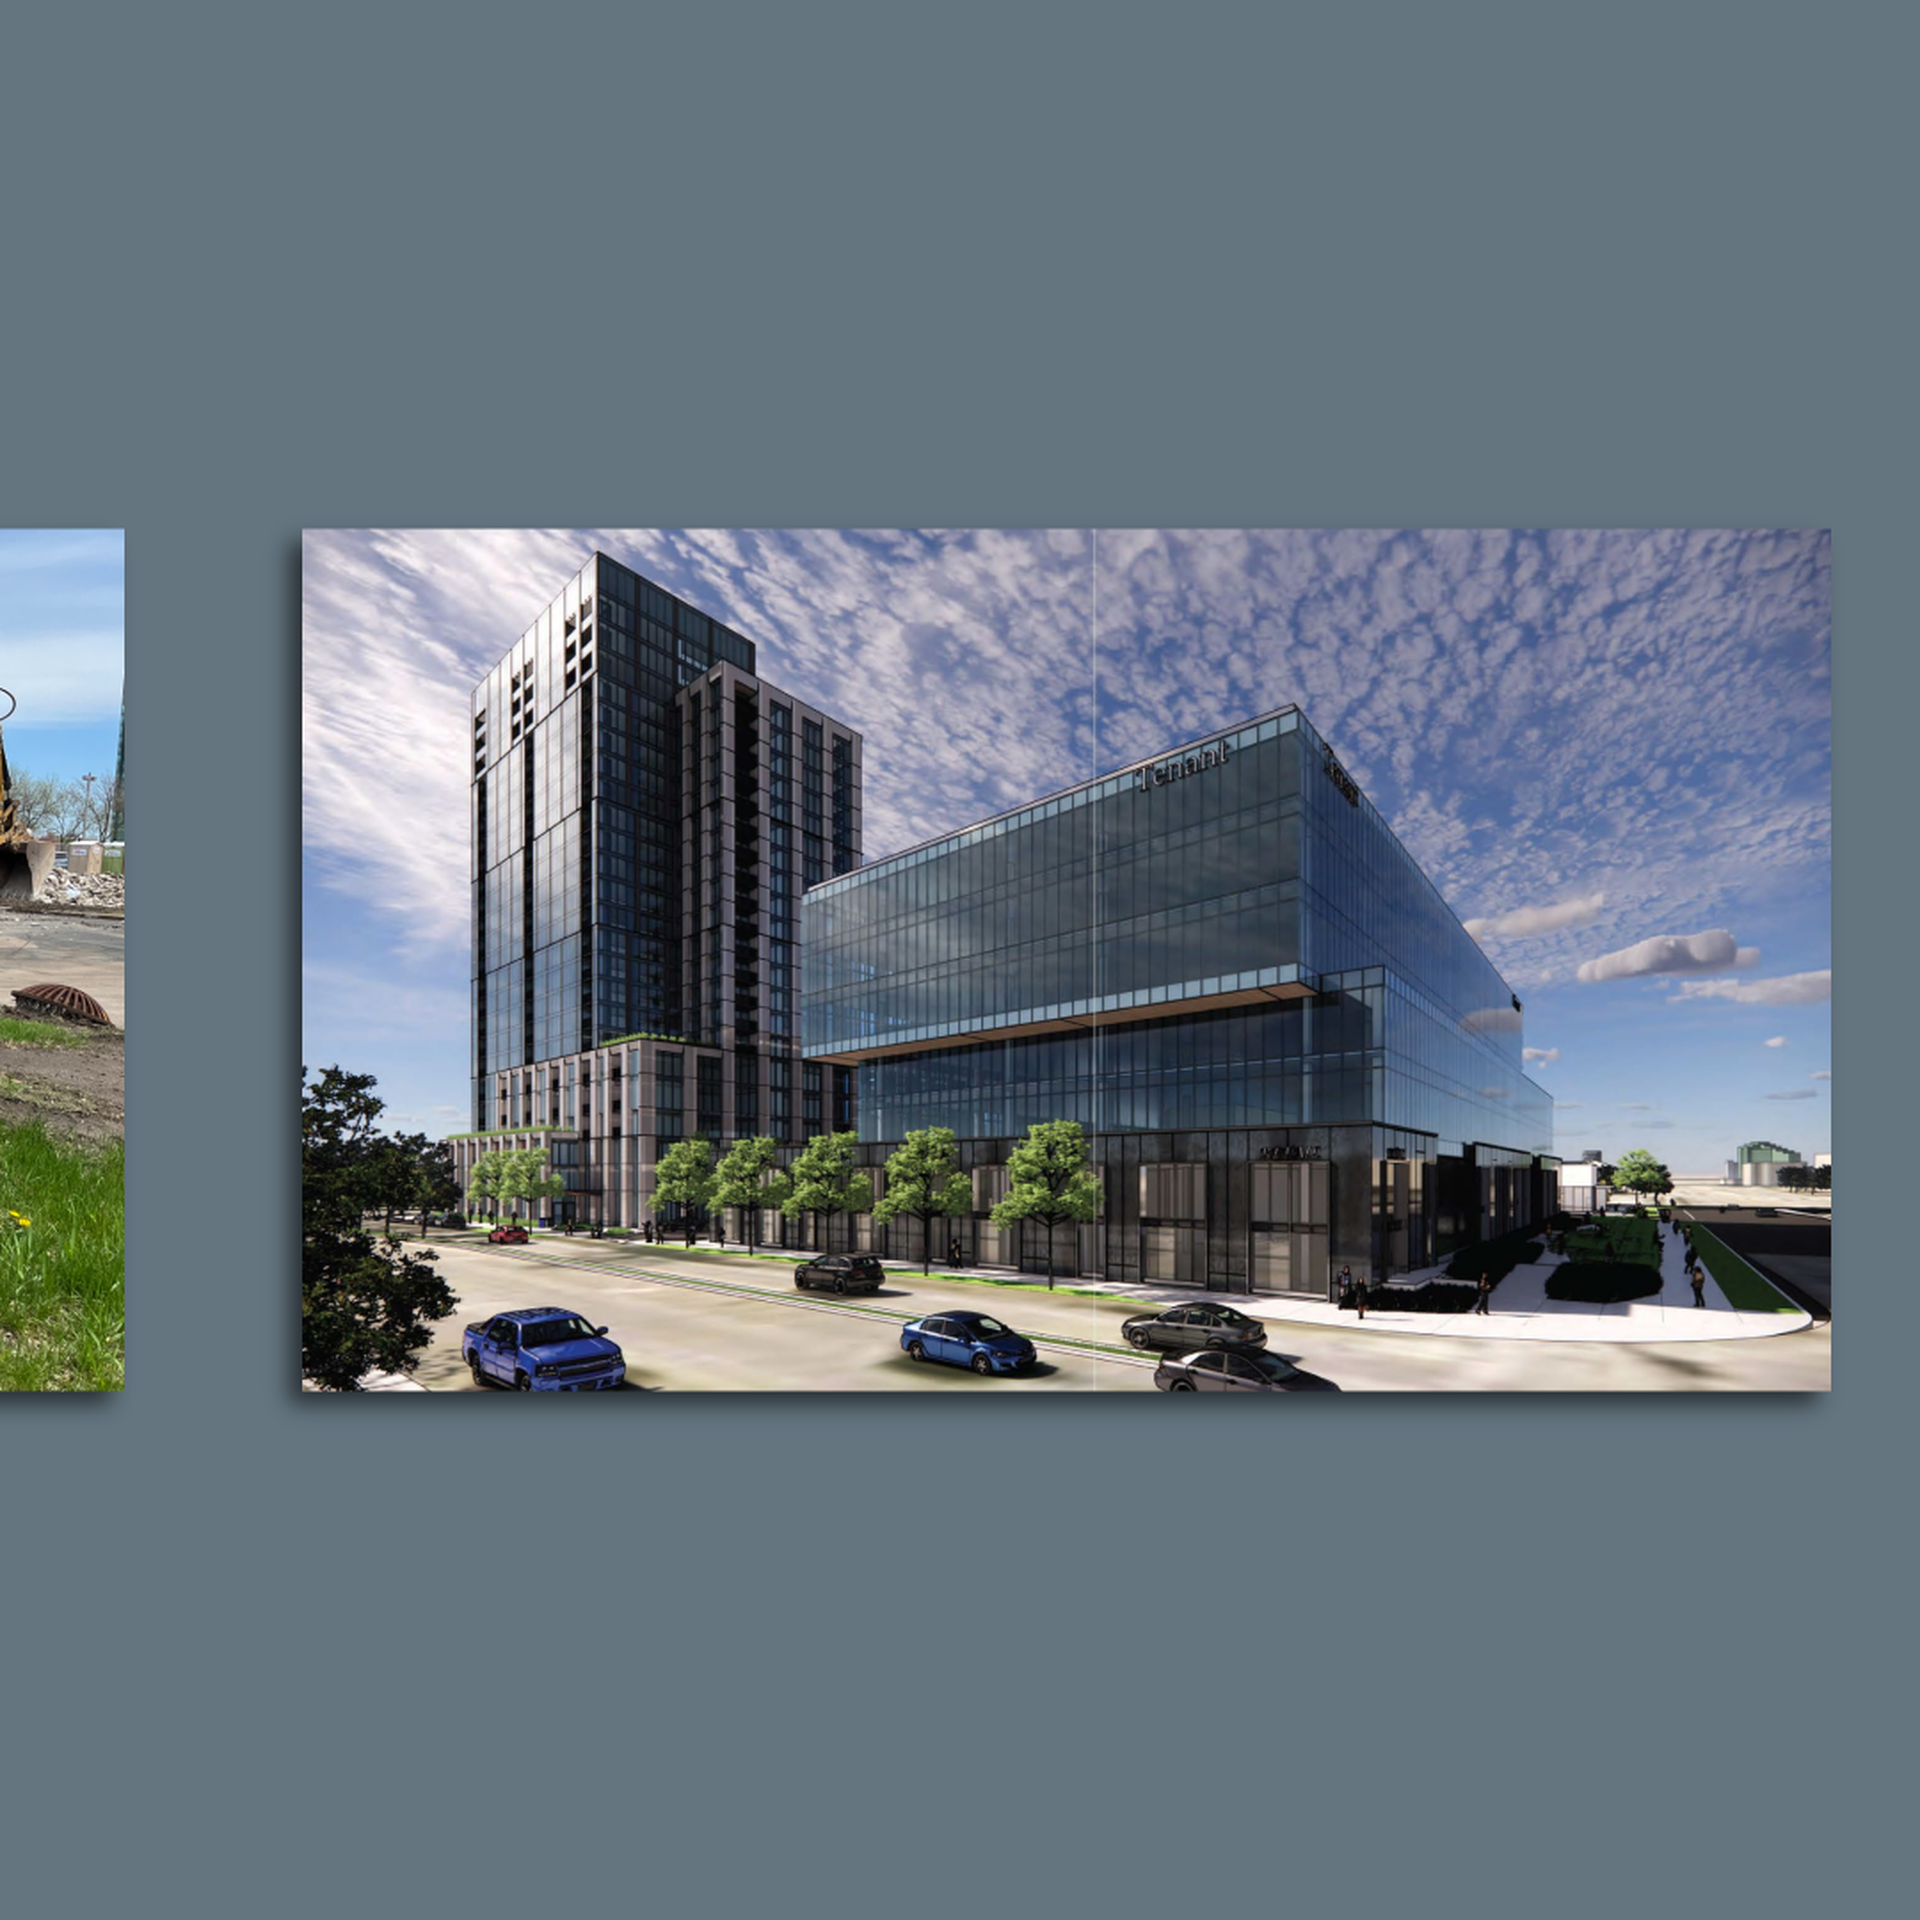 A demolished building on the left; a rendering of a new project on the right 